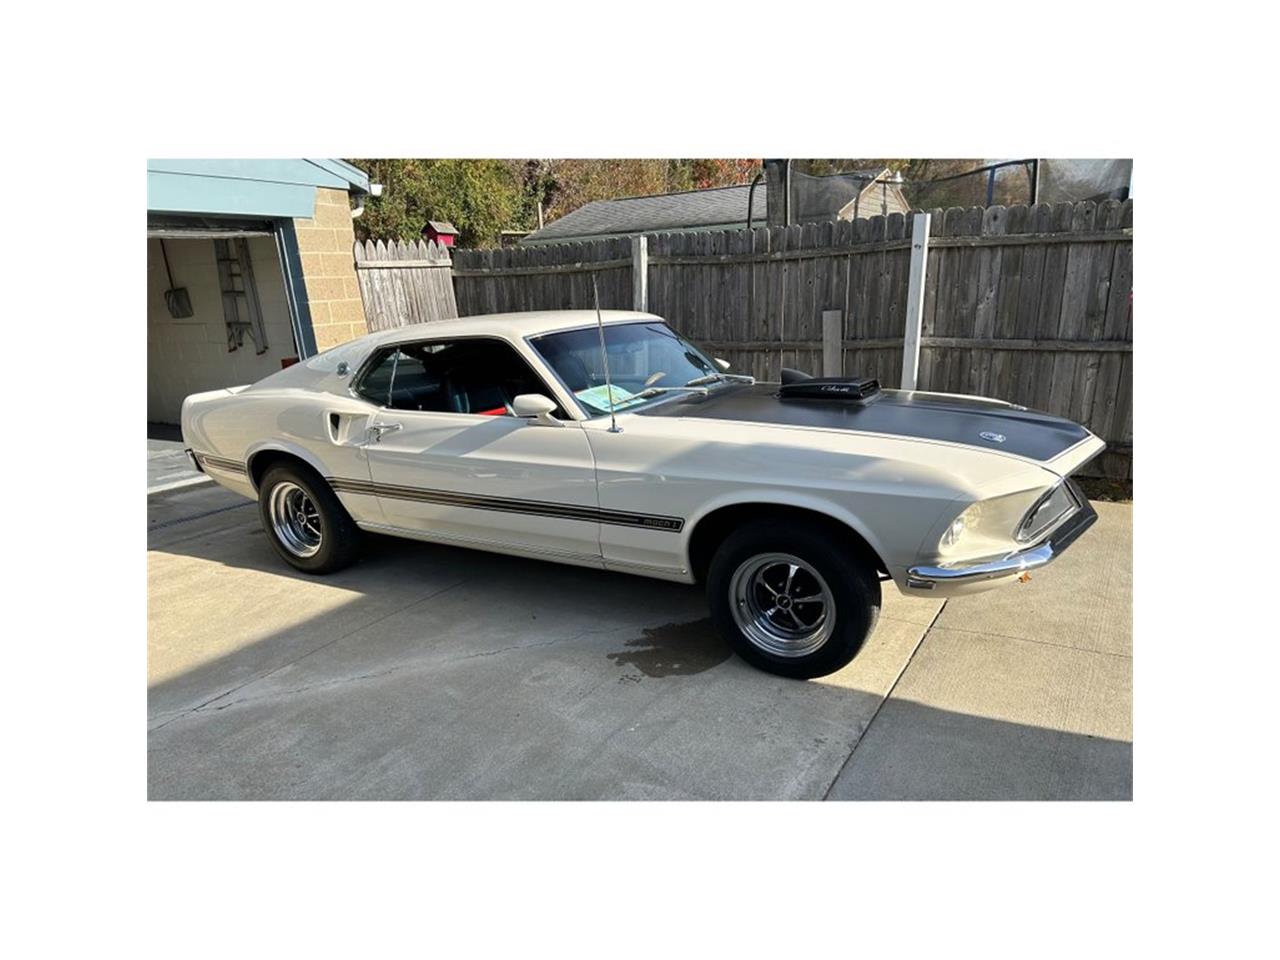 For Sale at Auction: 1969 Ford Mustang in Greensboro, North Carolina for sale in Greensboro, NC